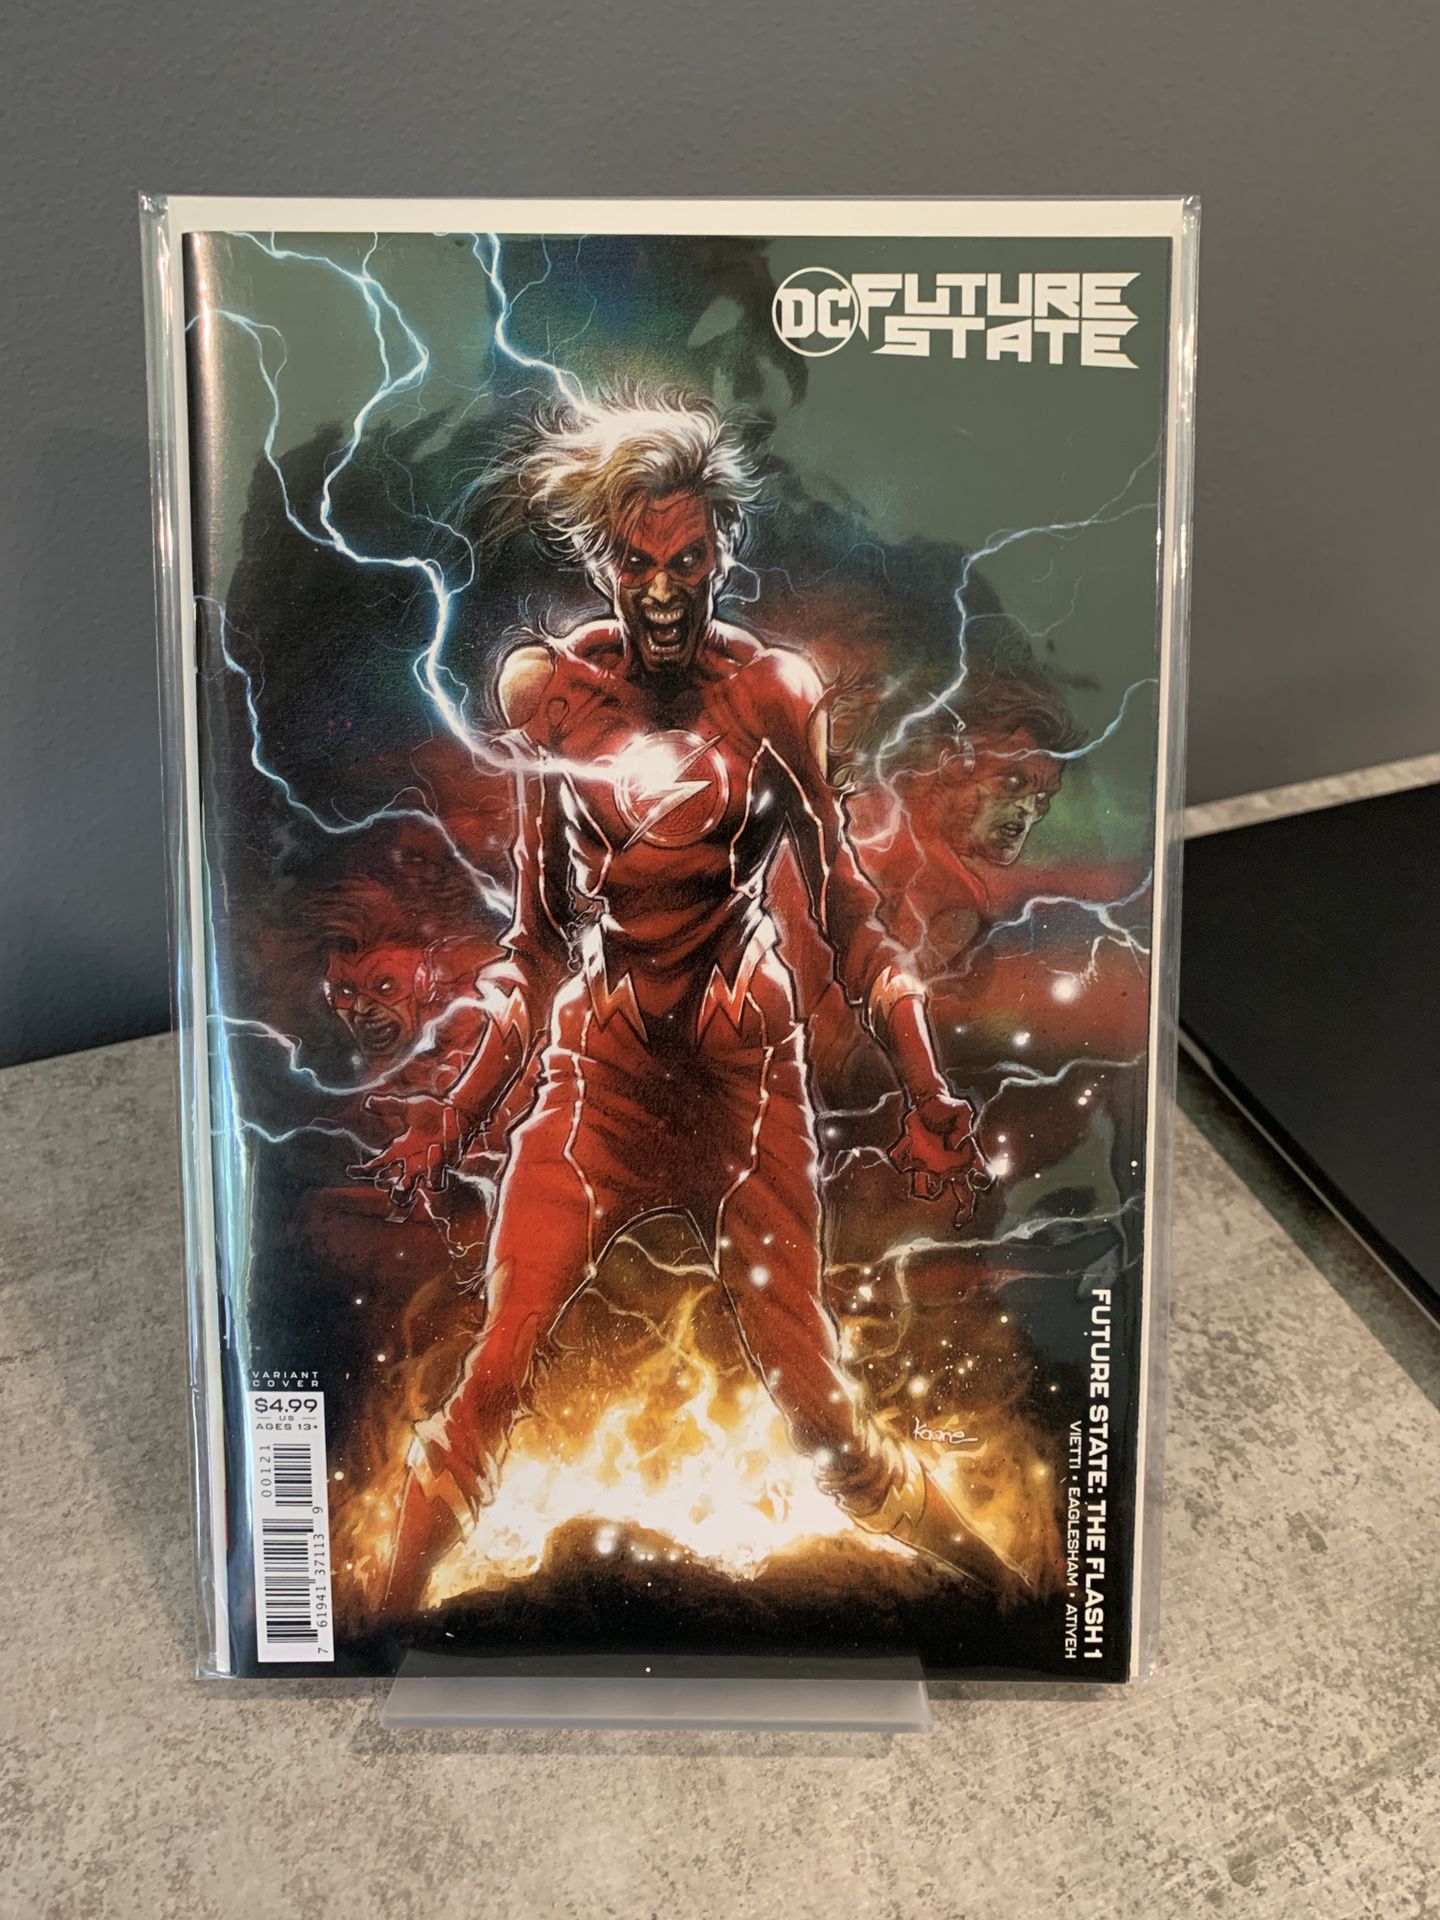 Future State: The Flash #1 (DC Comics, 2021) Variant Cover